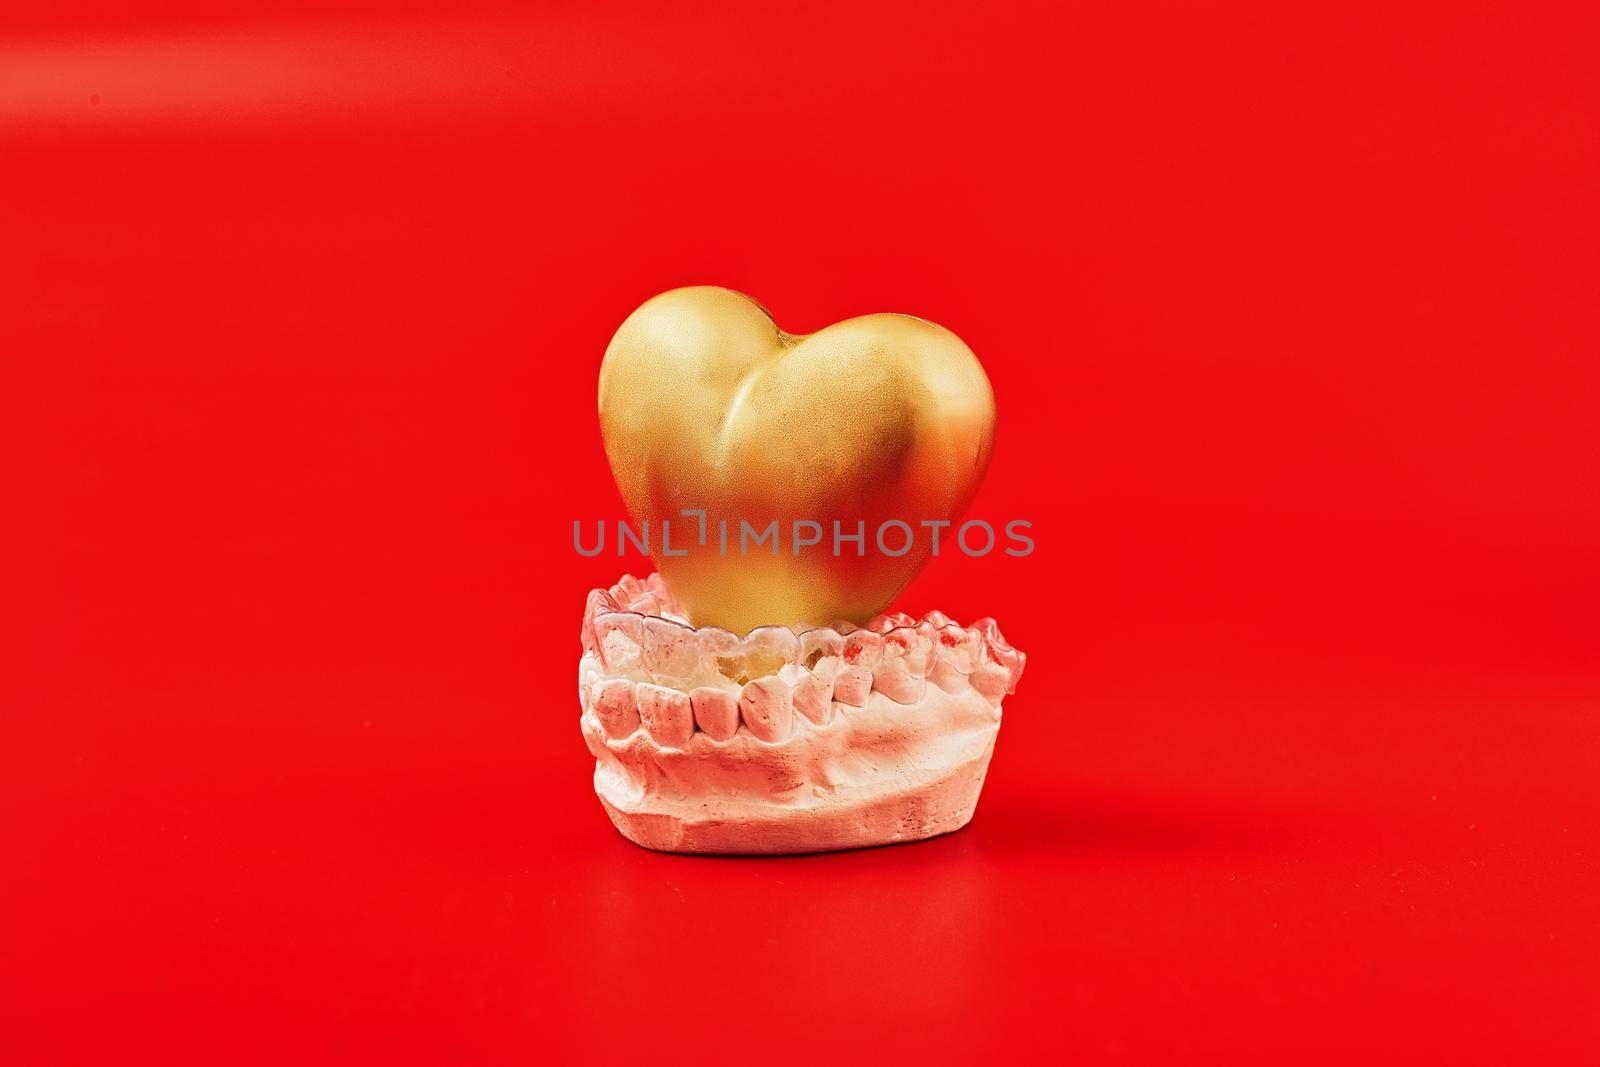 Heart of gold on a red background in invisible dental aligners or braces aplicable for an orthodontic dental treatment by Maximusnd